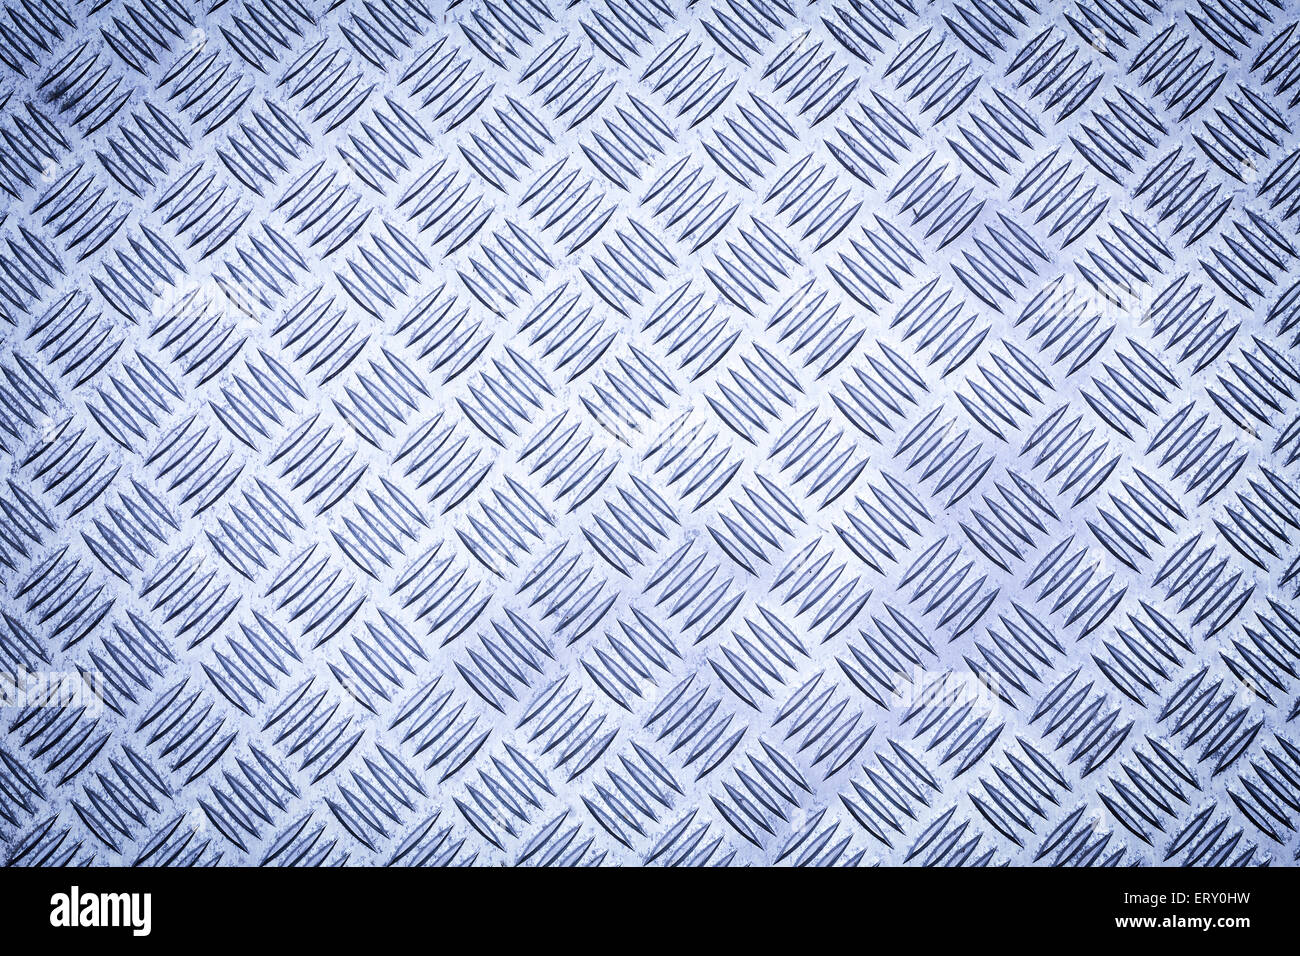 Blue colored diamond plate, checker plate, tread plate, cross hatch kick plate and Durbar floor plate for texture background. Stock Photo